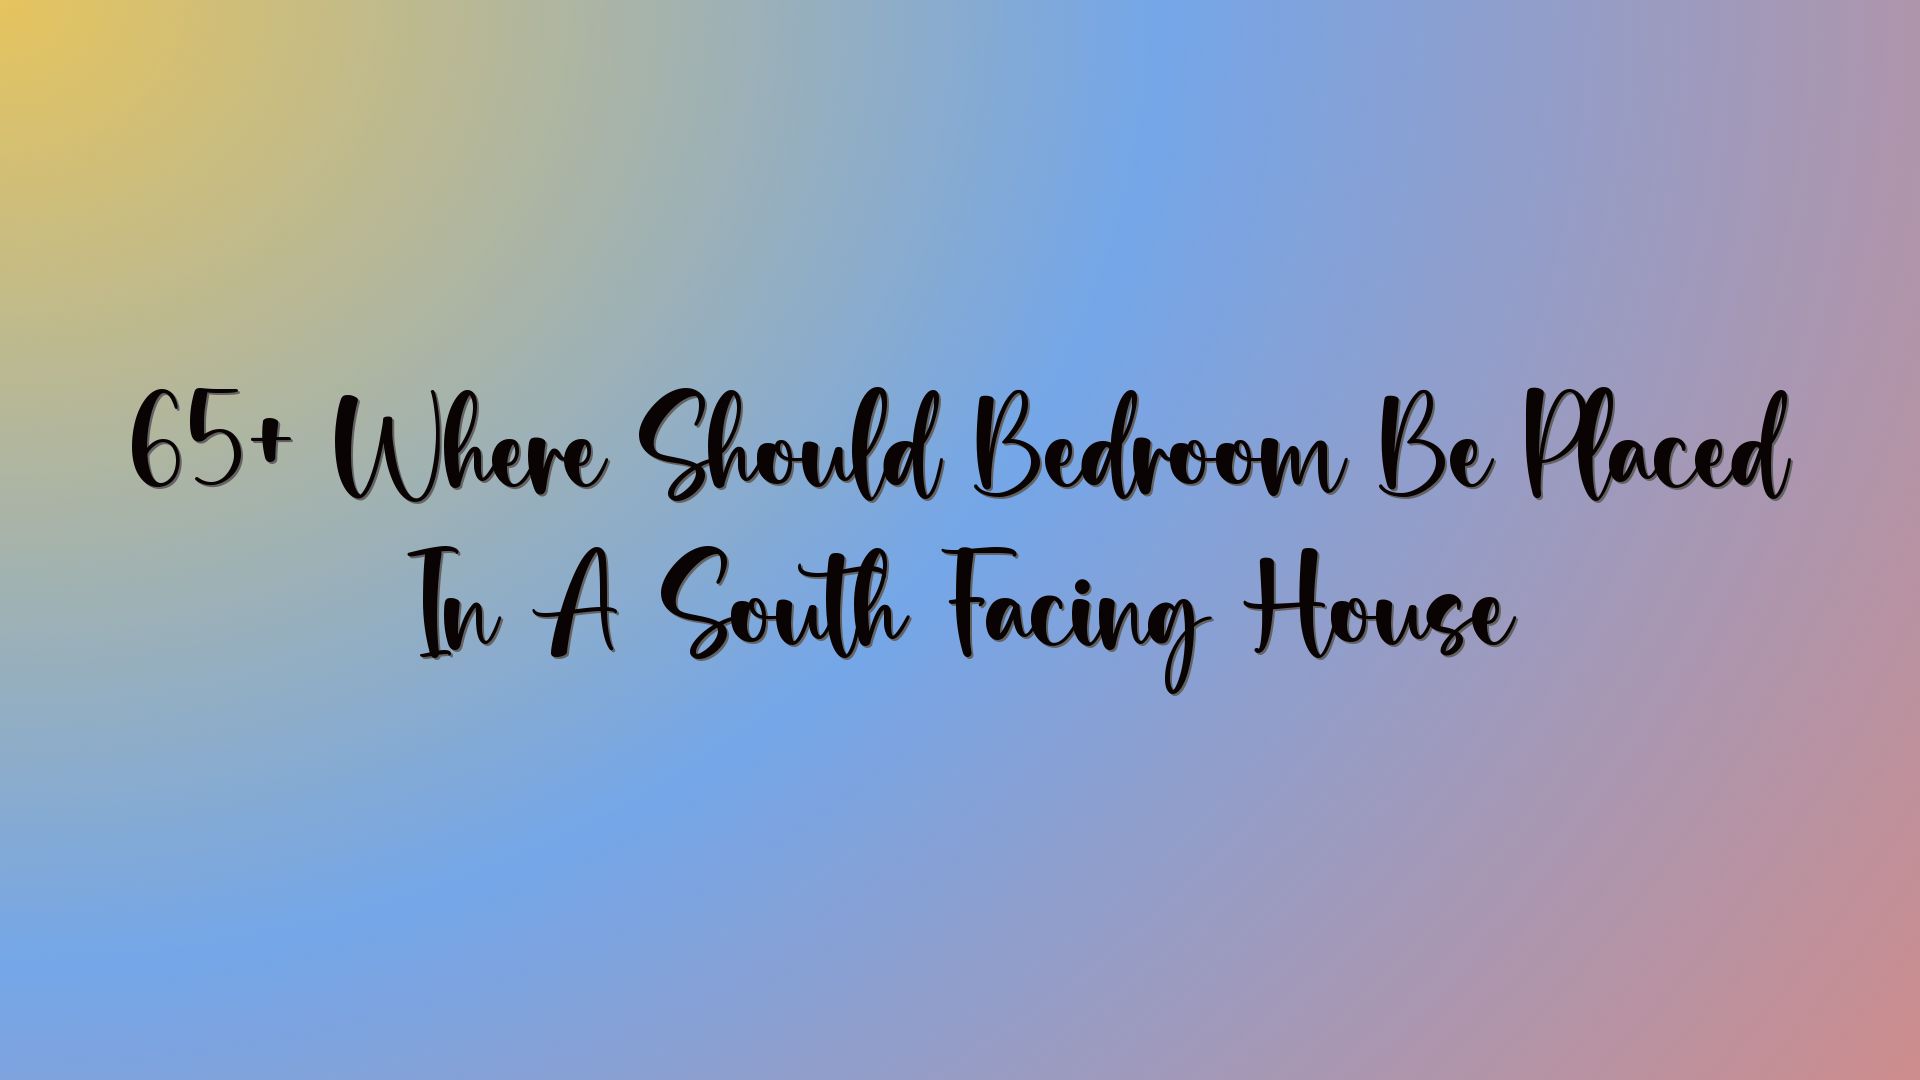 65+ Where Should Bedroom Be Placed In A South Facing House